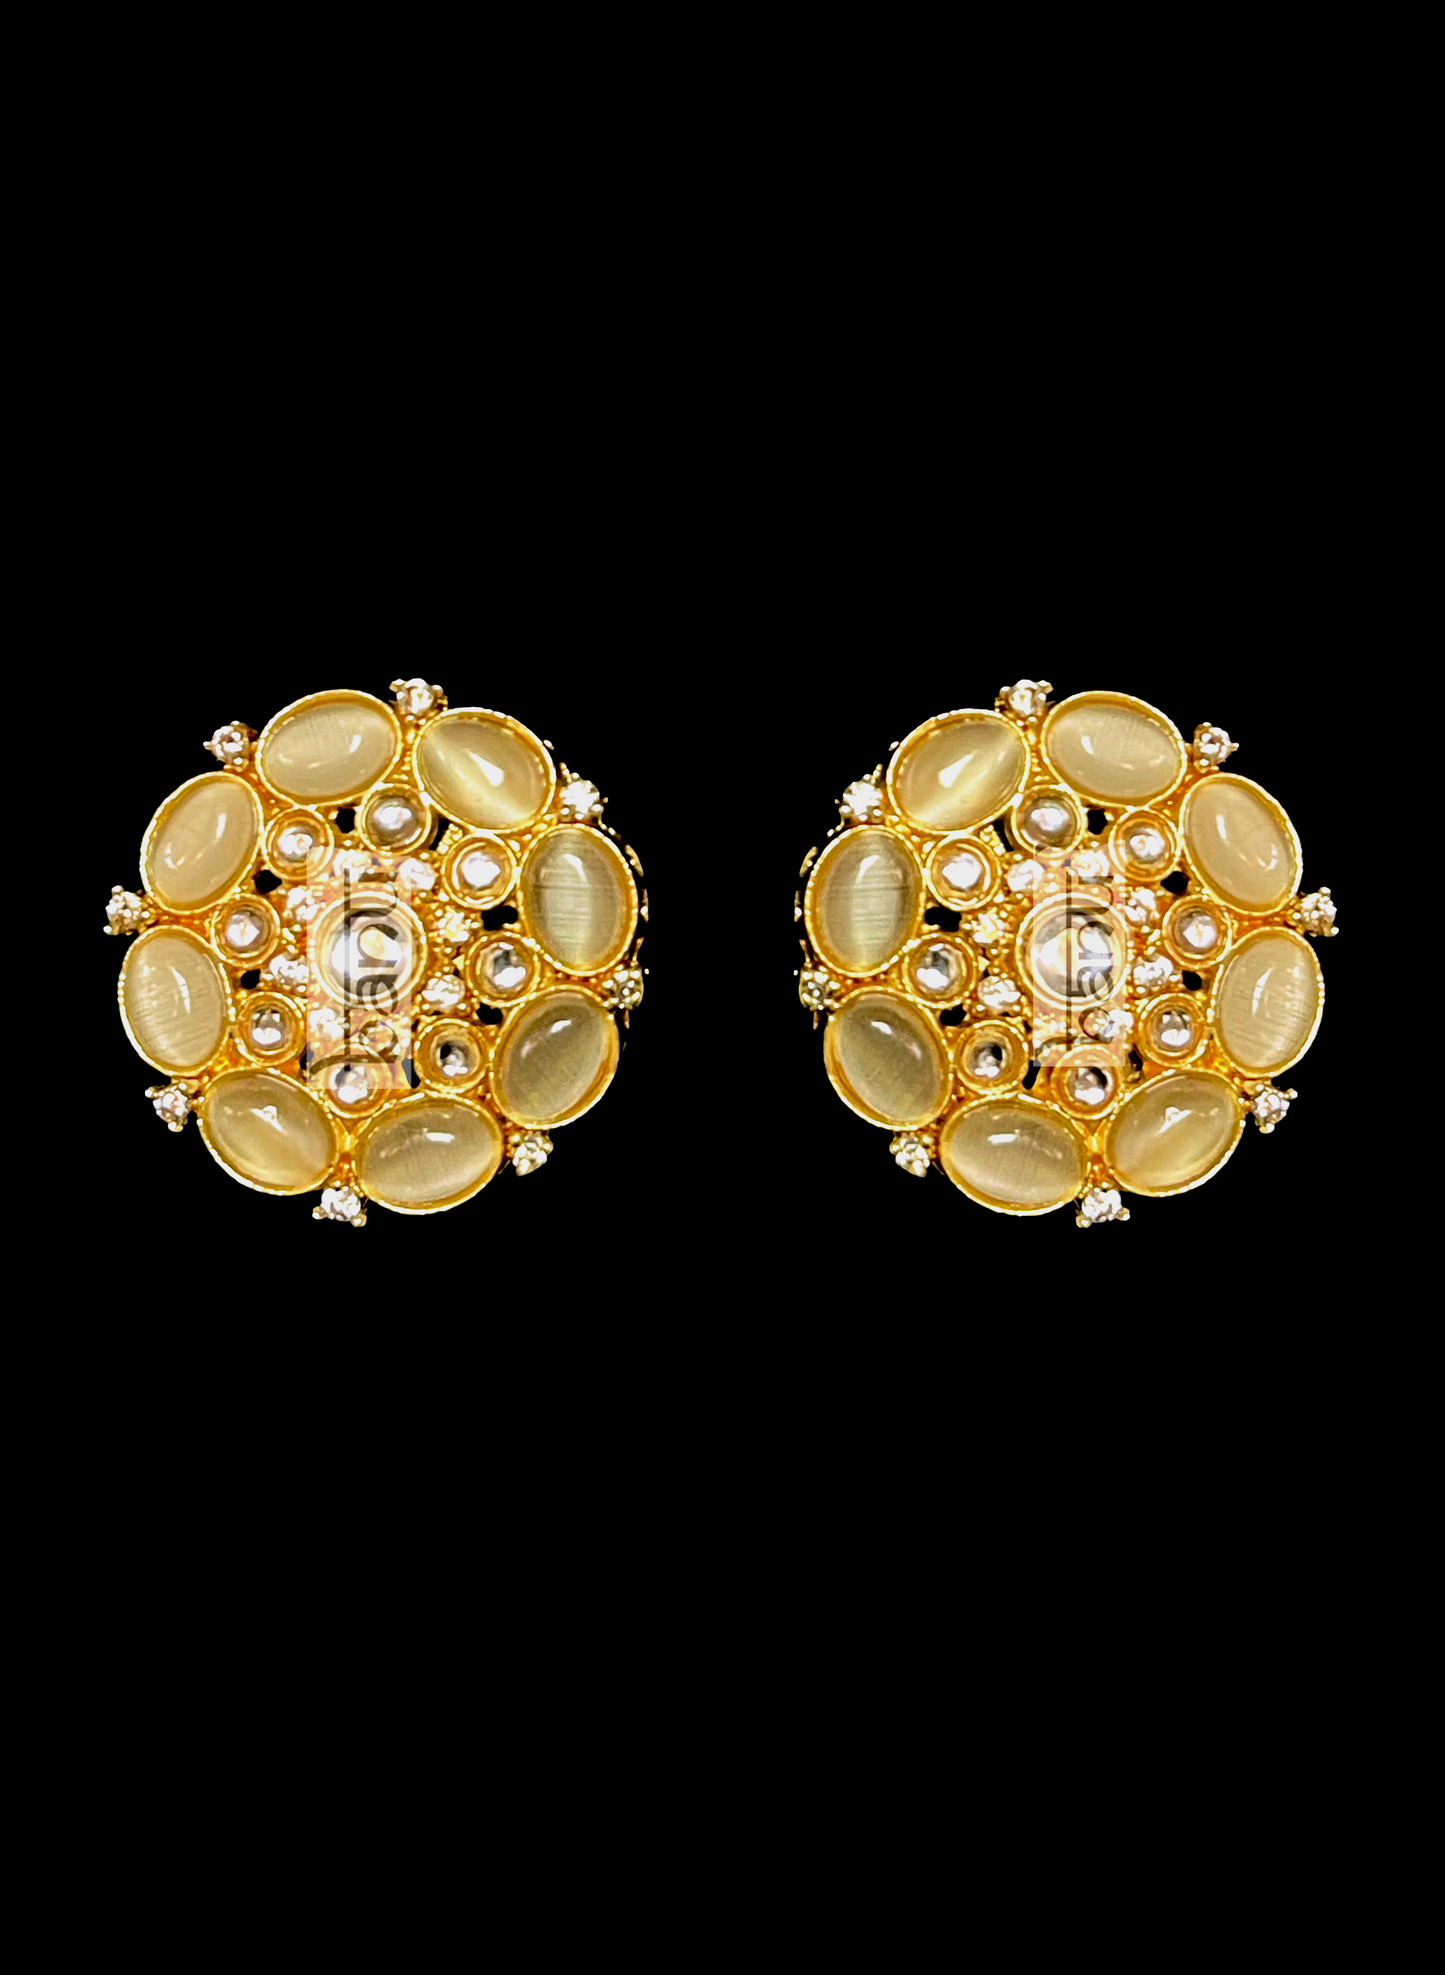 Load image into Gallery viewer, Golden traditional earrings with CZ crystals
